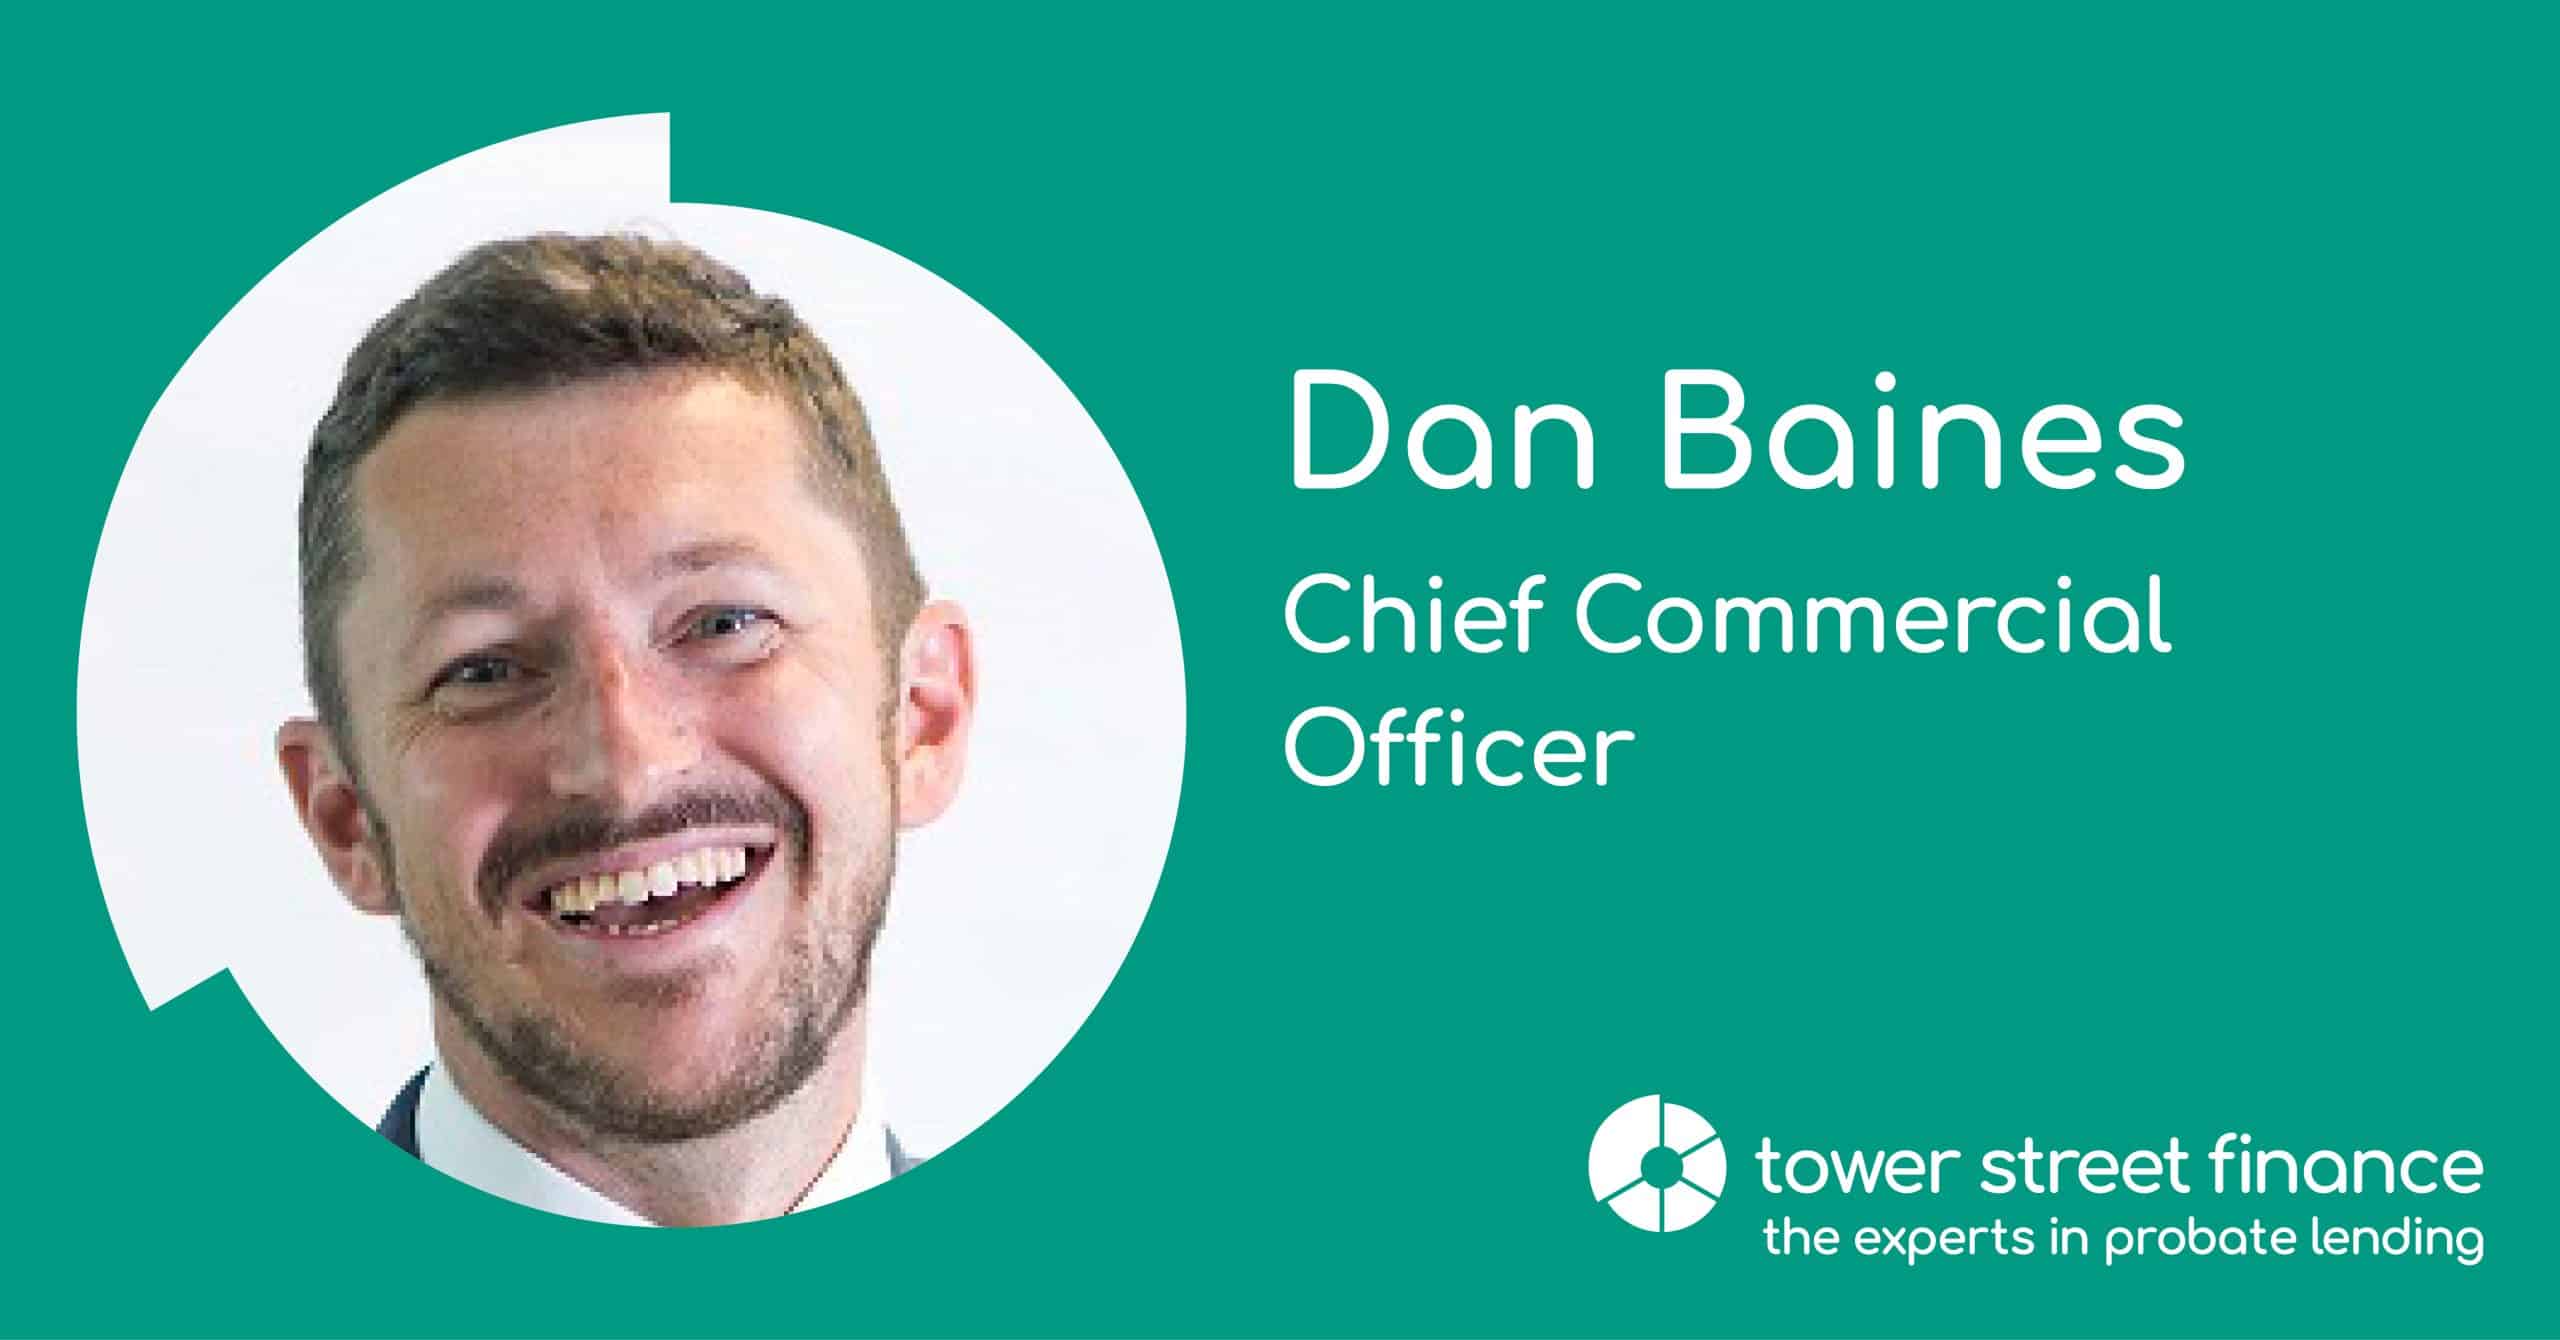 Tower Street Finance Appoints Dan Baines as Chief Commercial Officer